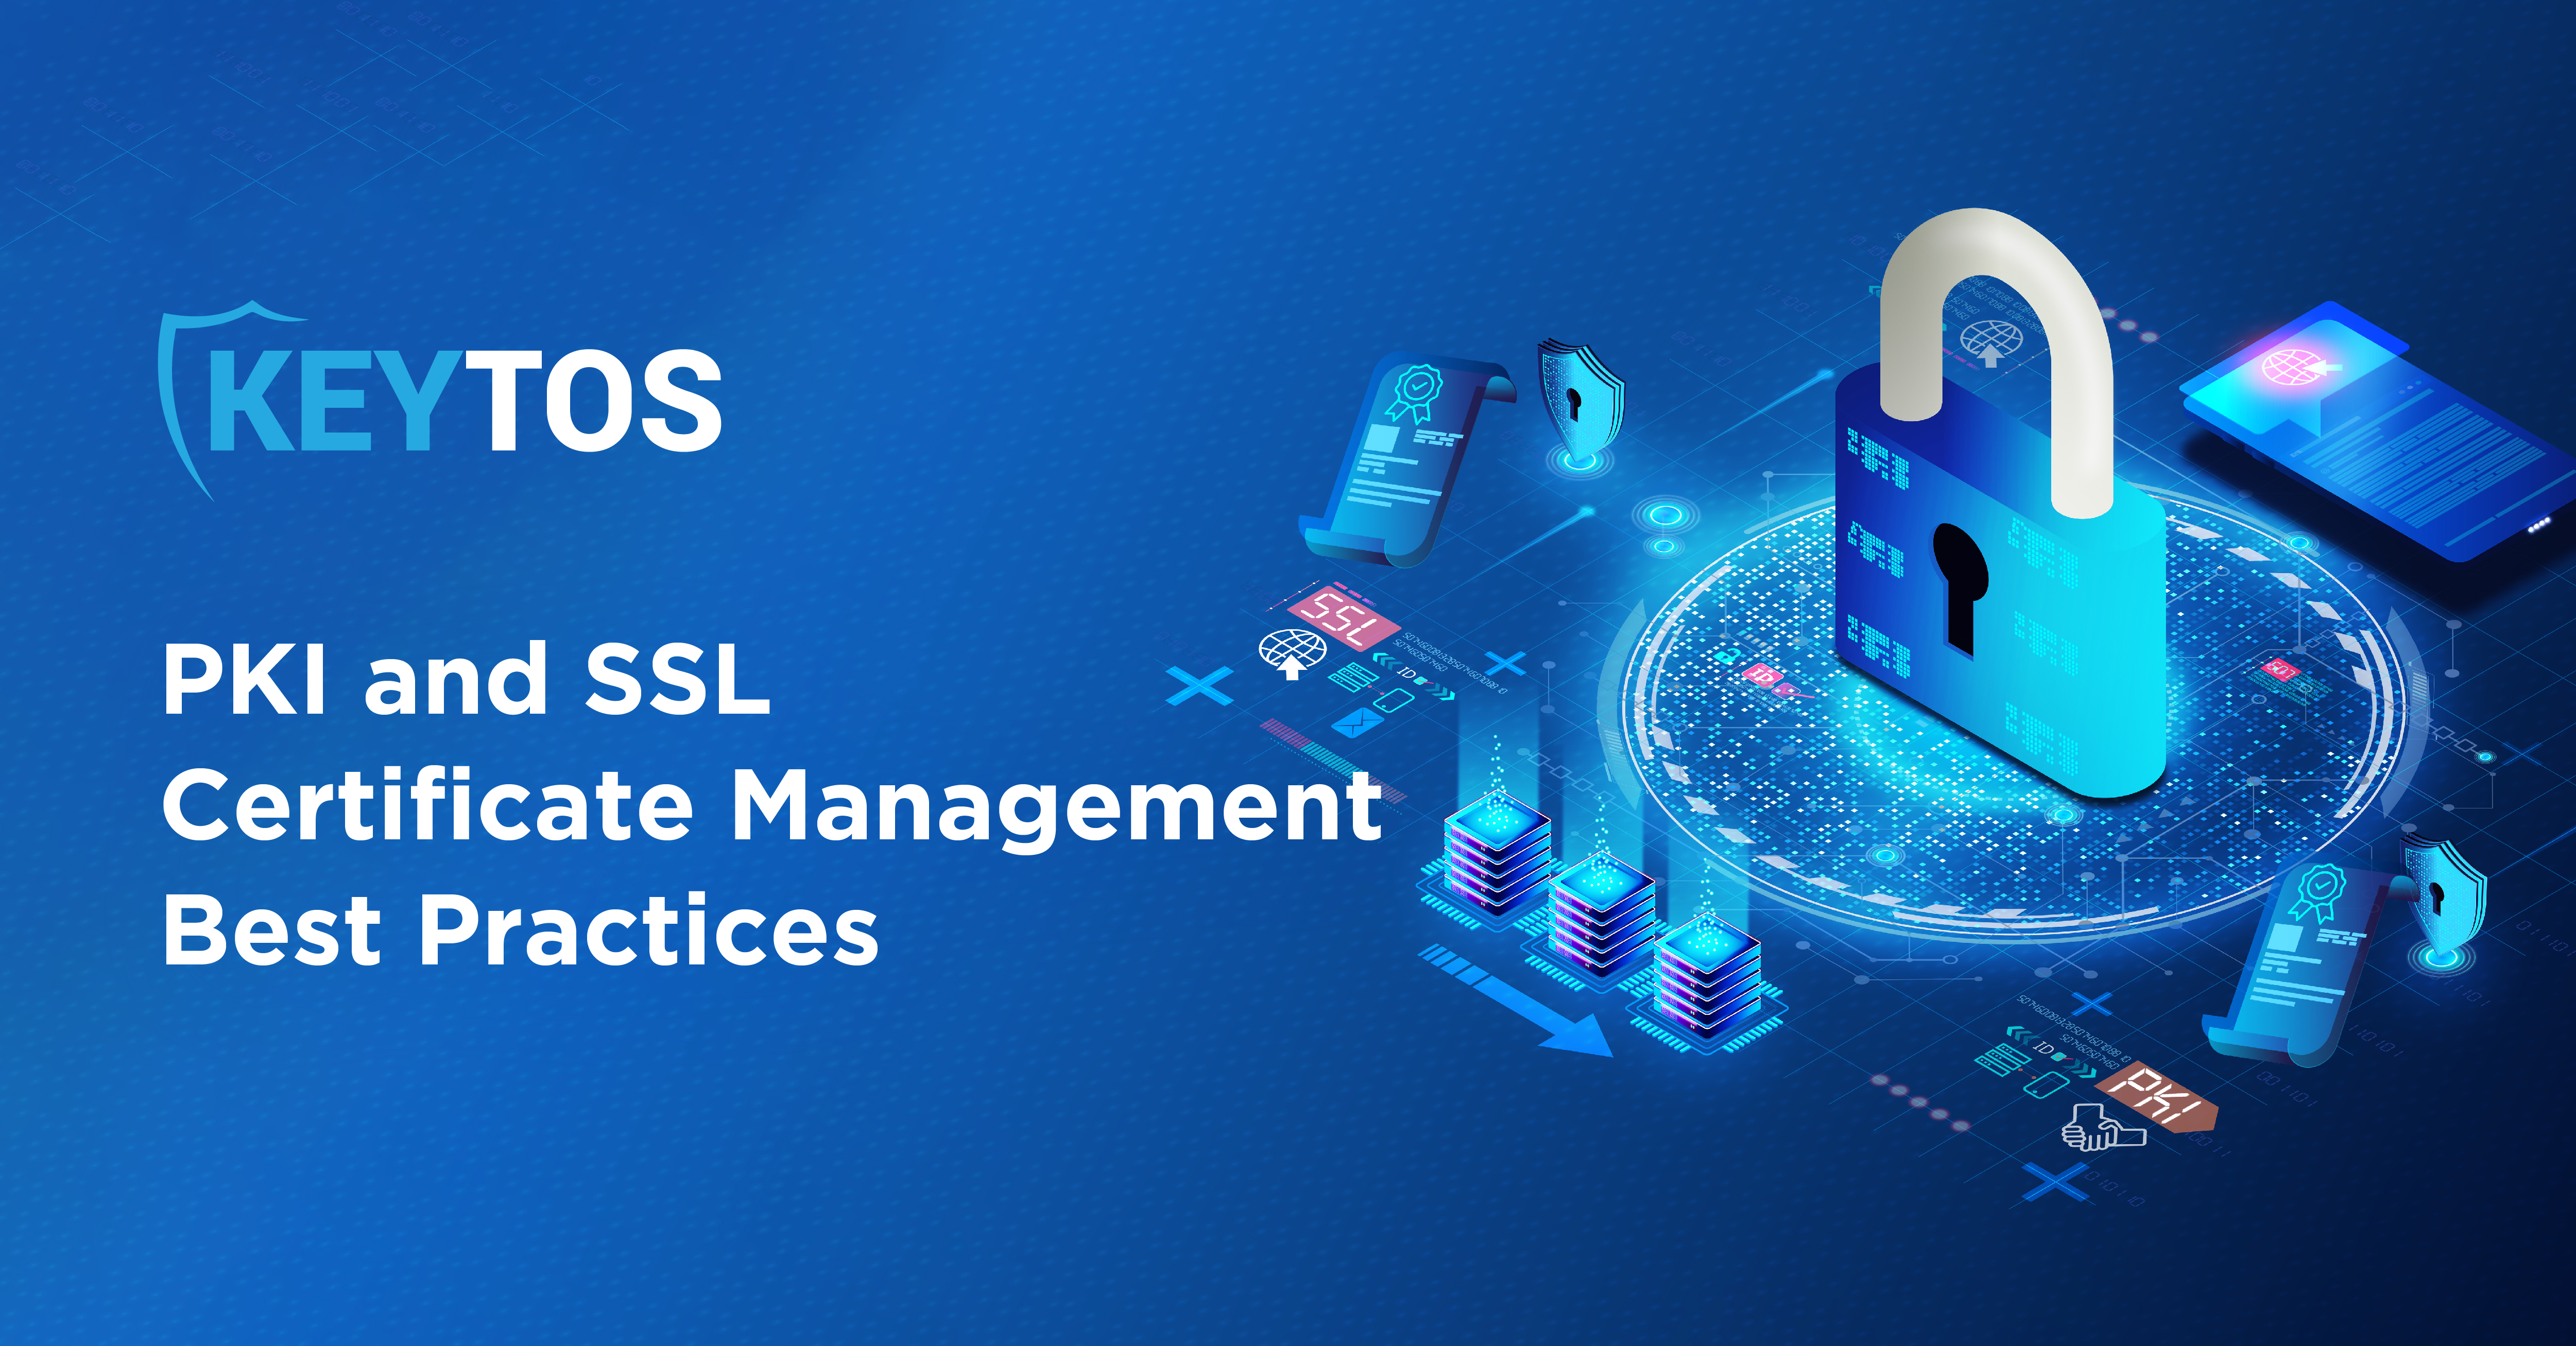 PKI and SSL Certificate Management Best Practices